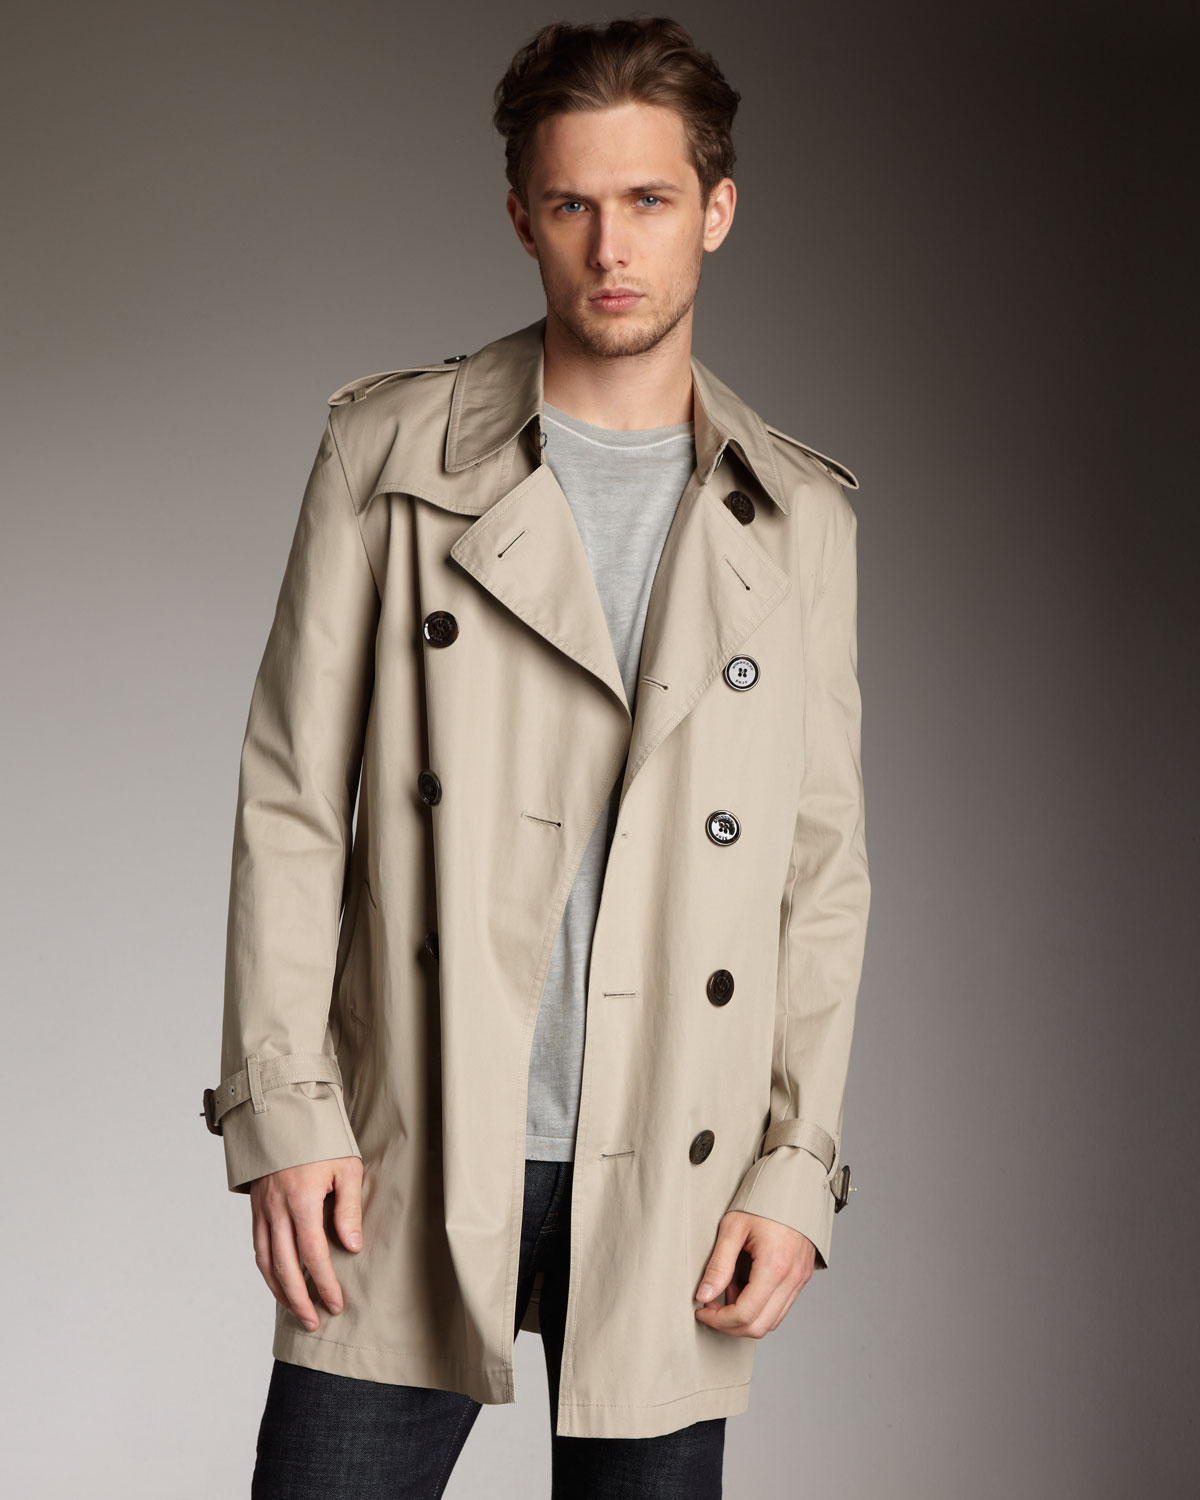 Lyst - Burberry Brit Classic Trench Coat Taupe in Brown for Men